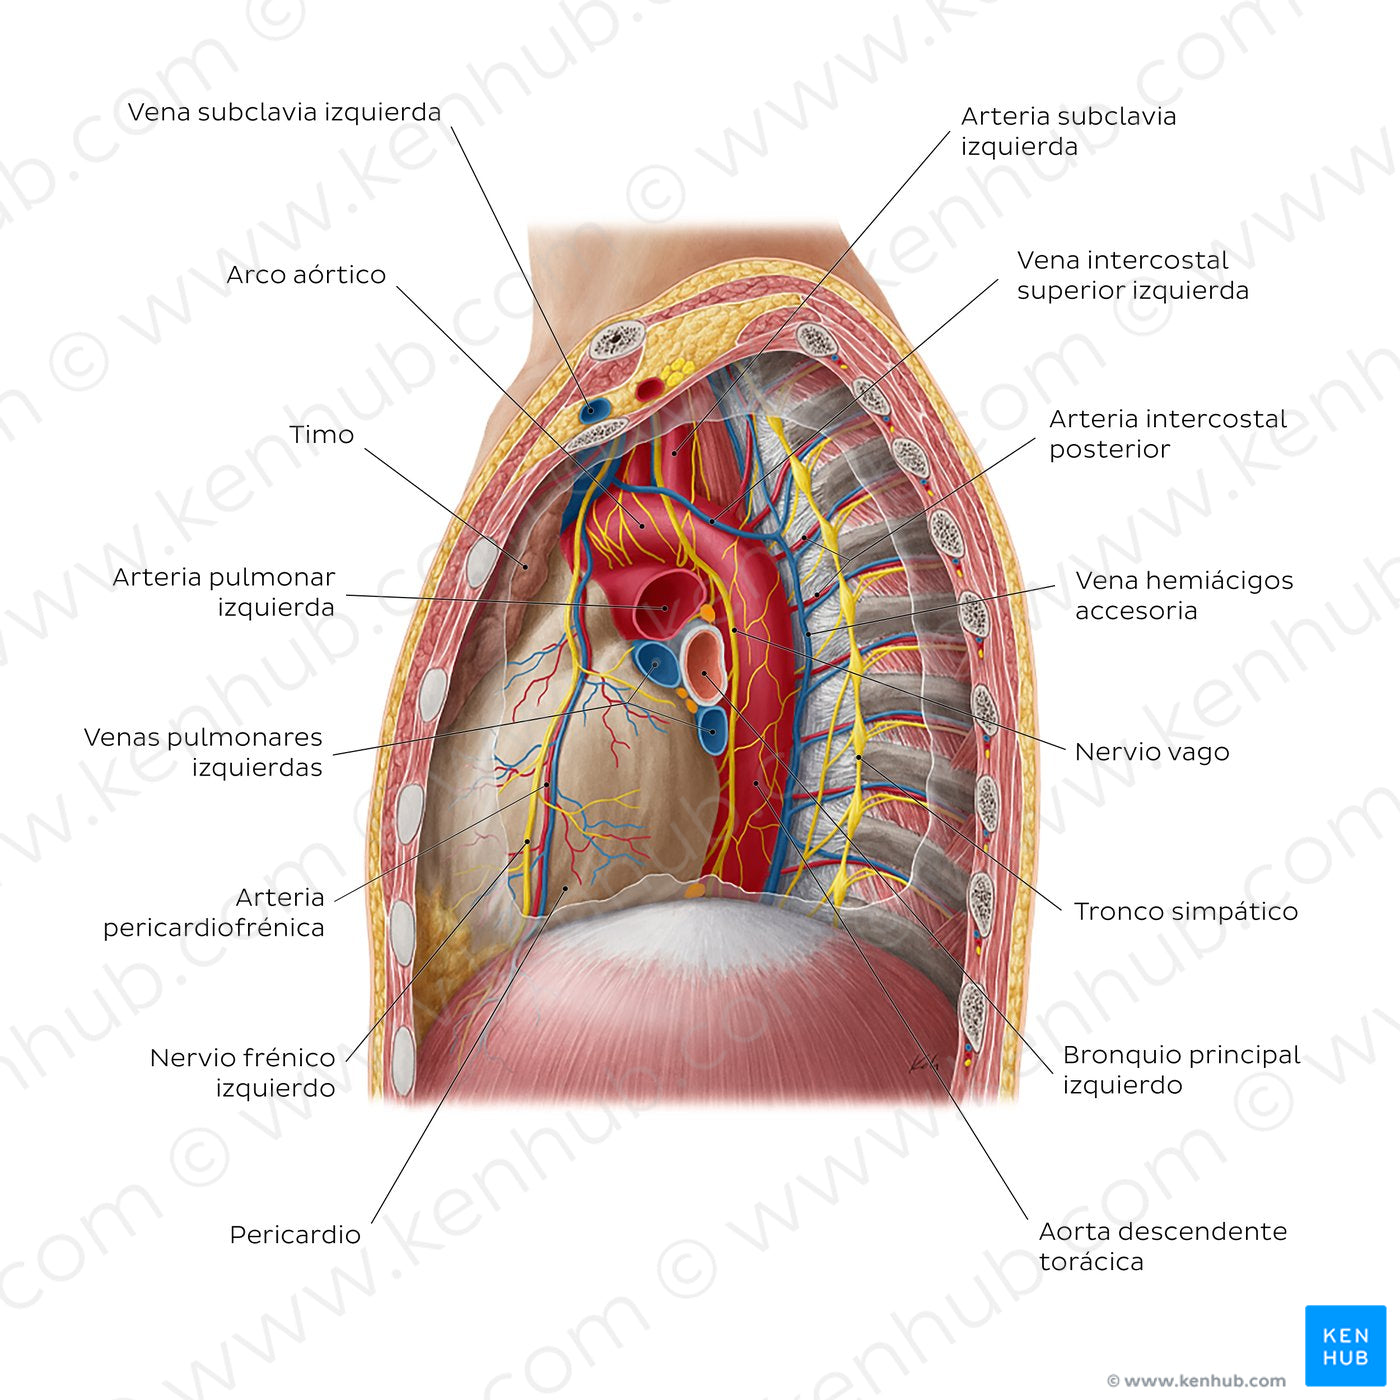 Contents of the mediastinum: Left lateral view (Spanish)